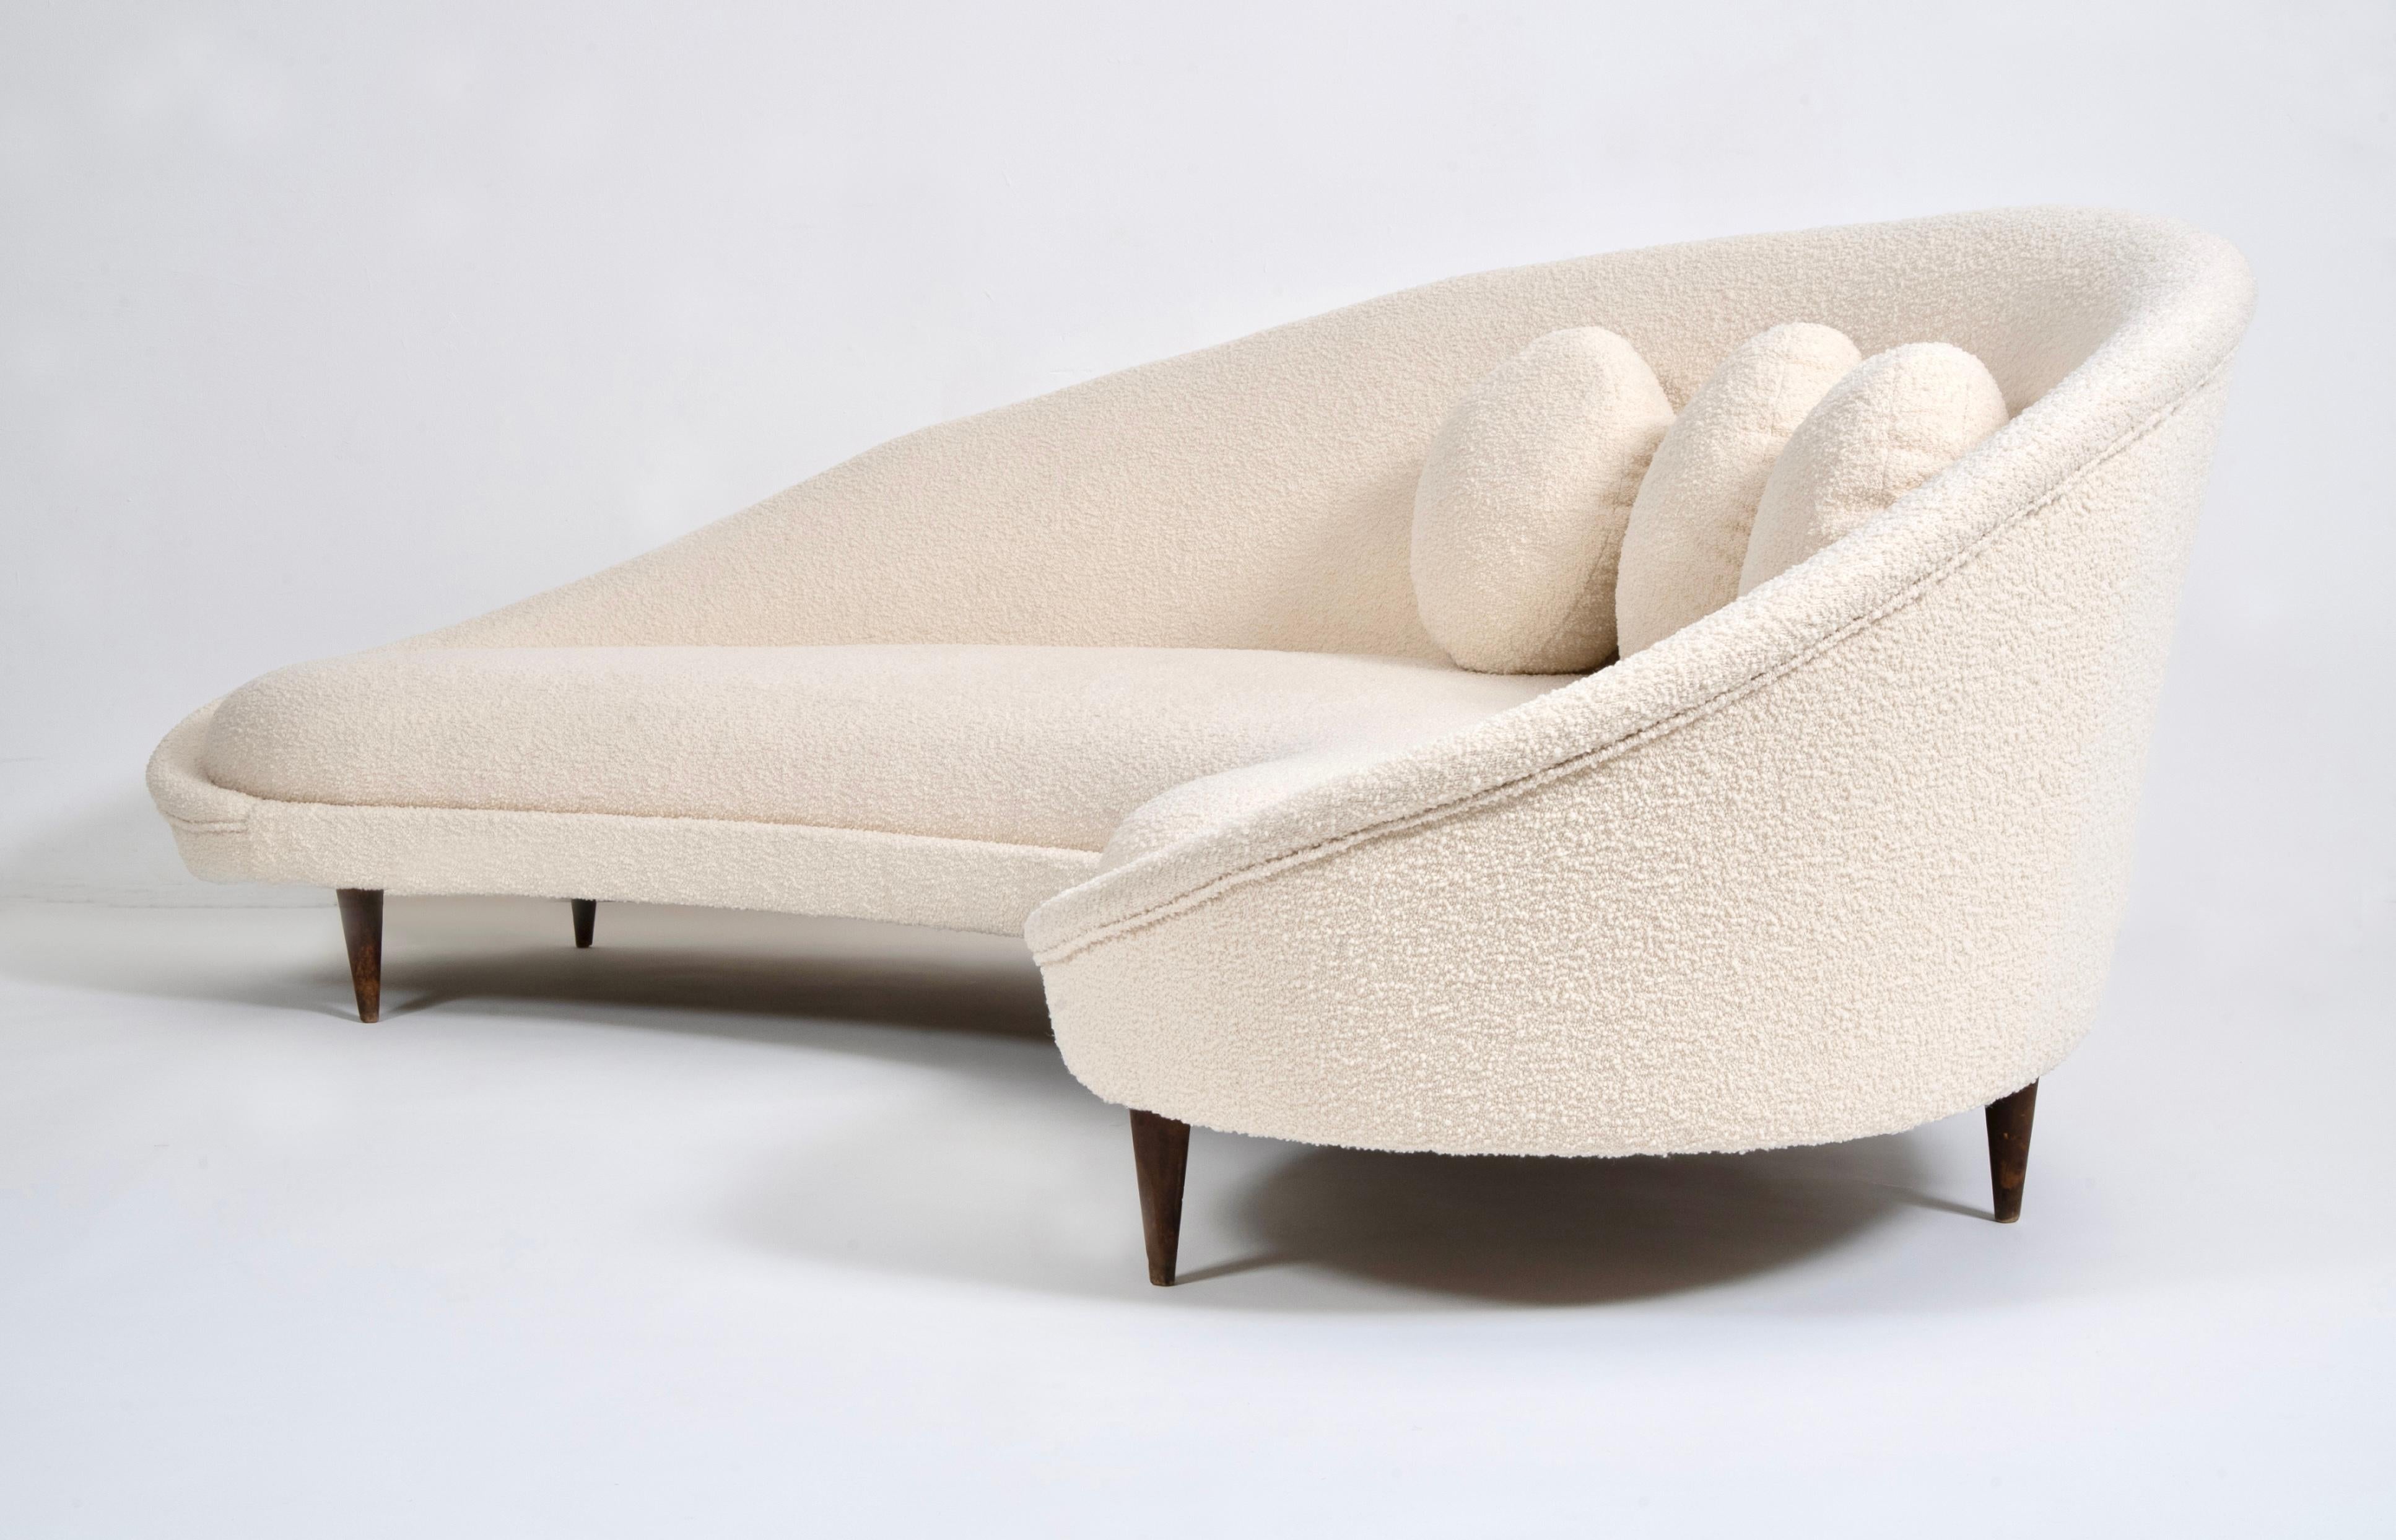 20th Century Federico Munari Curved Lounge Sofa, Italy, 1955 In Excellent Condition For Sale In London, GB